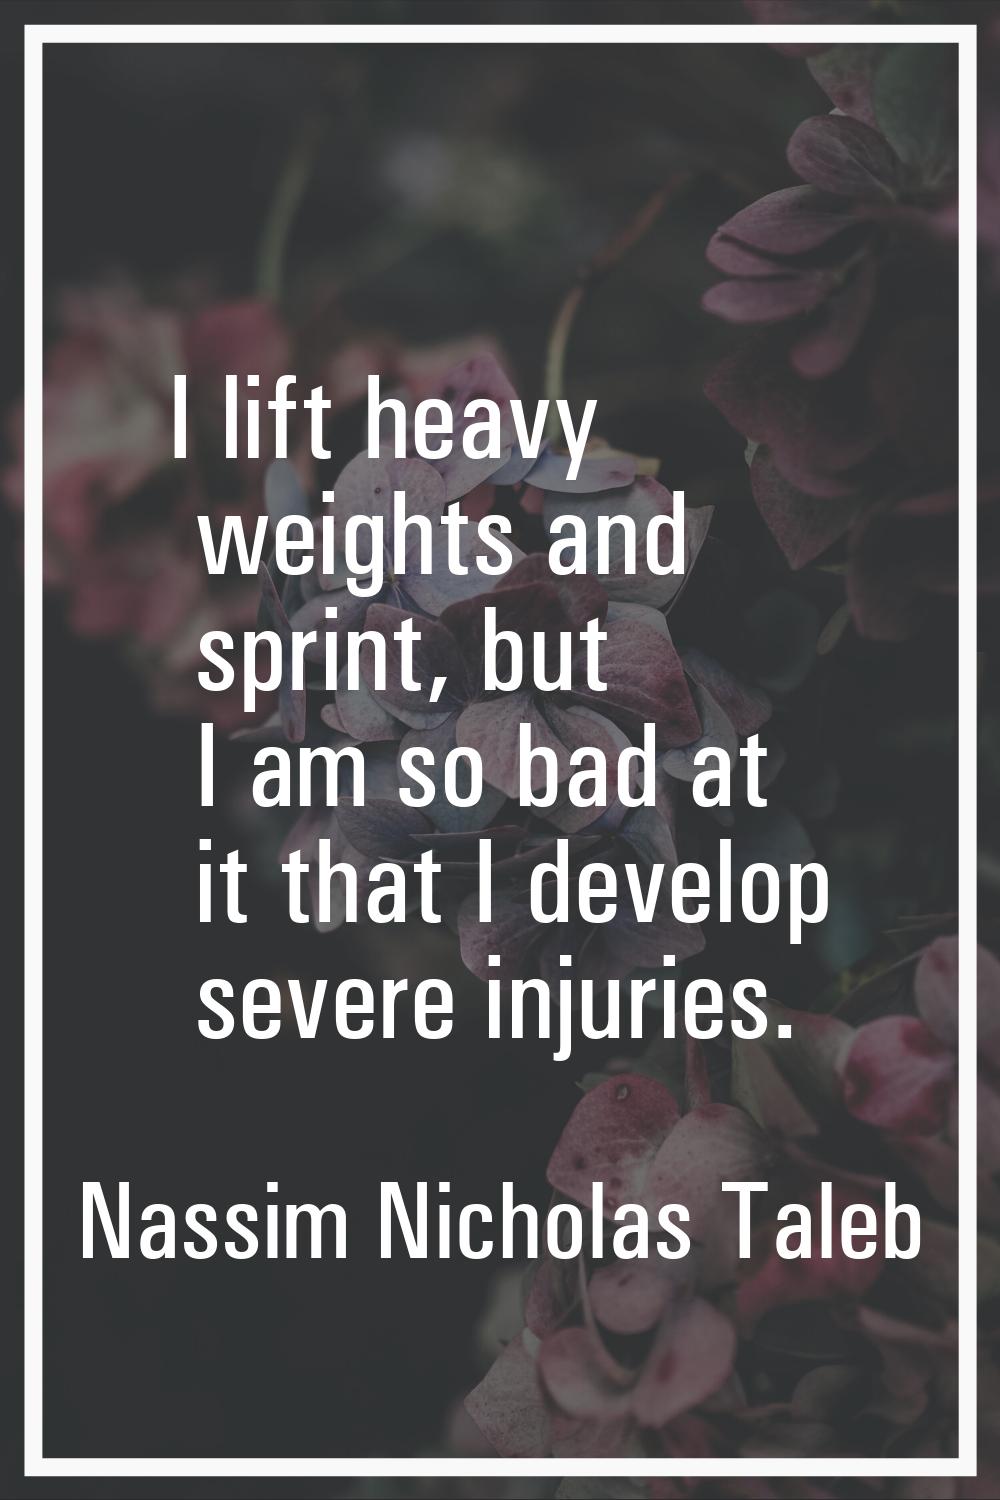 I lift heavy weights and sprint, but I am so bad at it that I develop severe injuries.